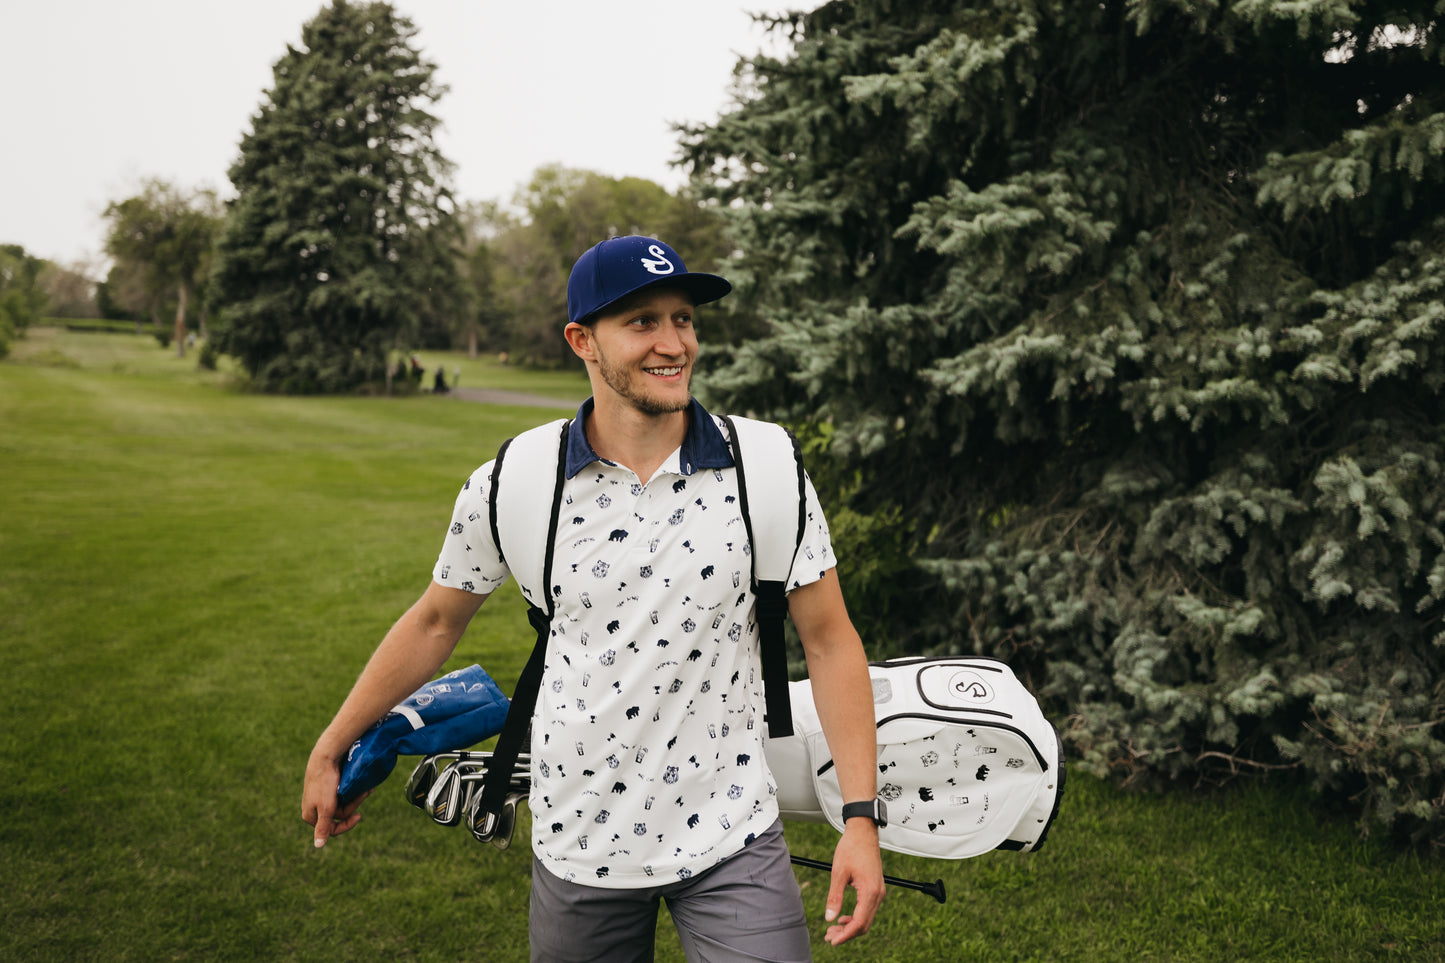 MNML GOLF x Swannies golf collaboration featuring their collection print, hand painted on the MV2 model.